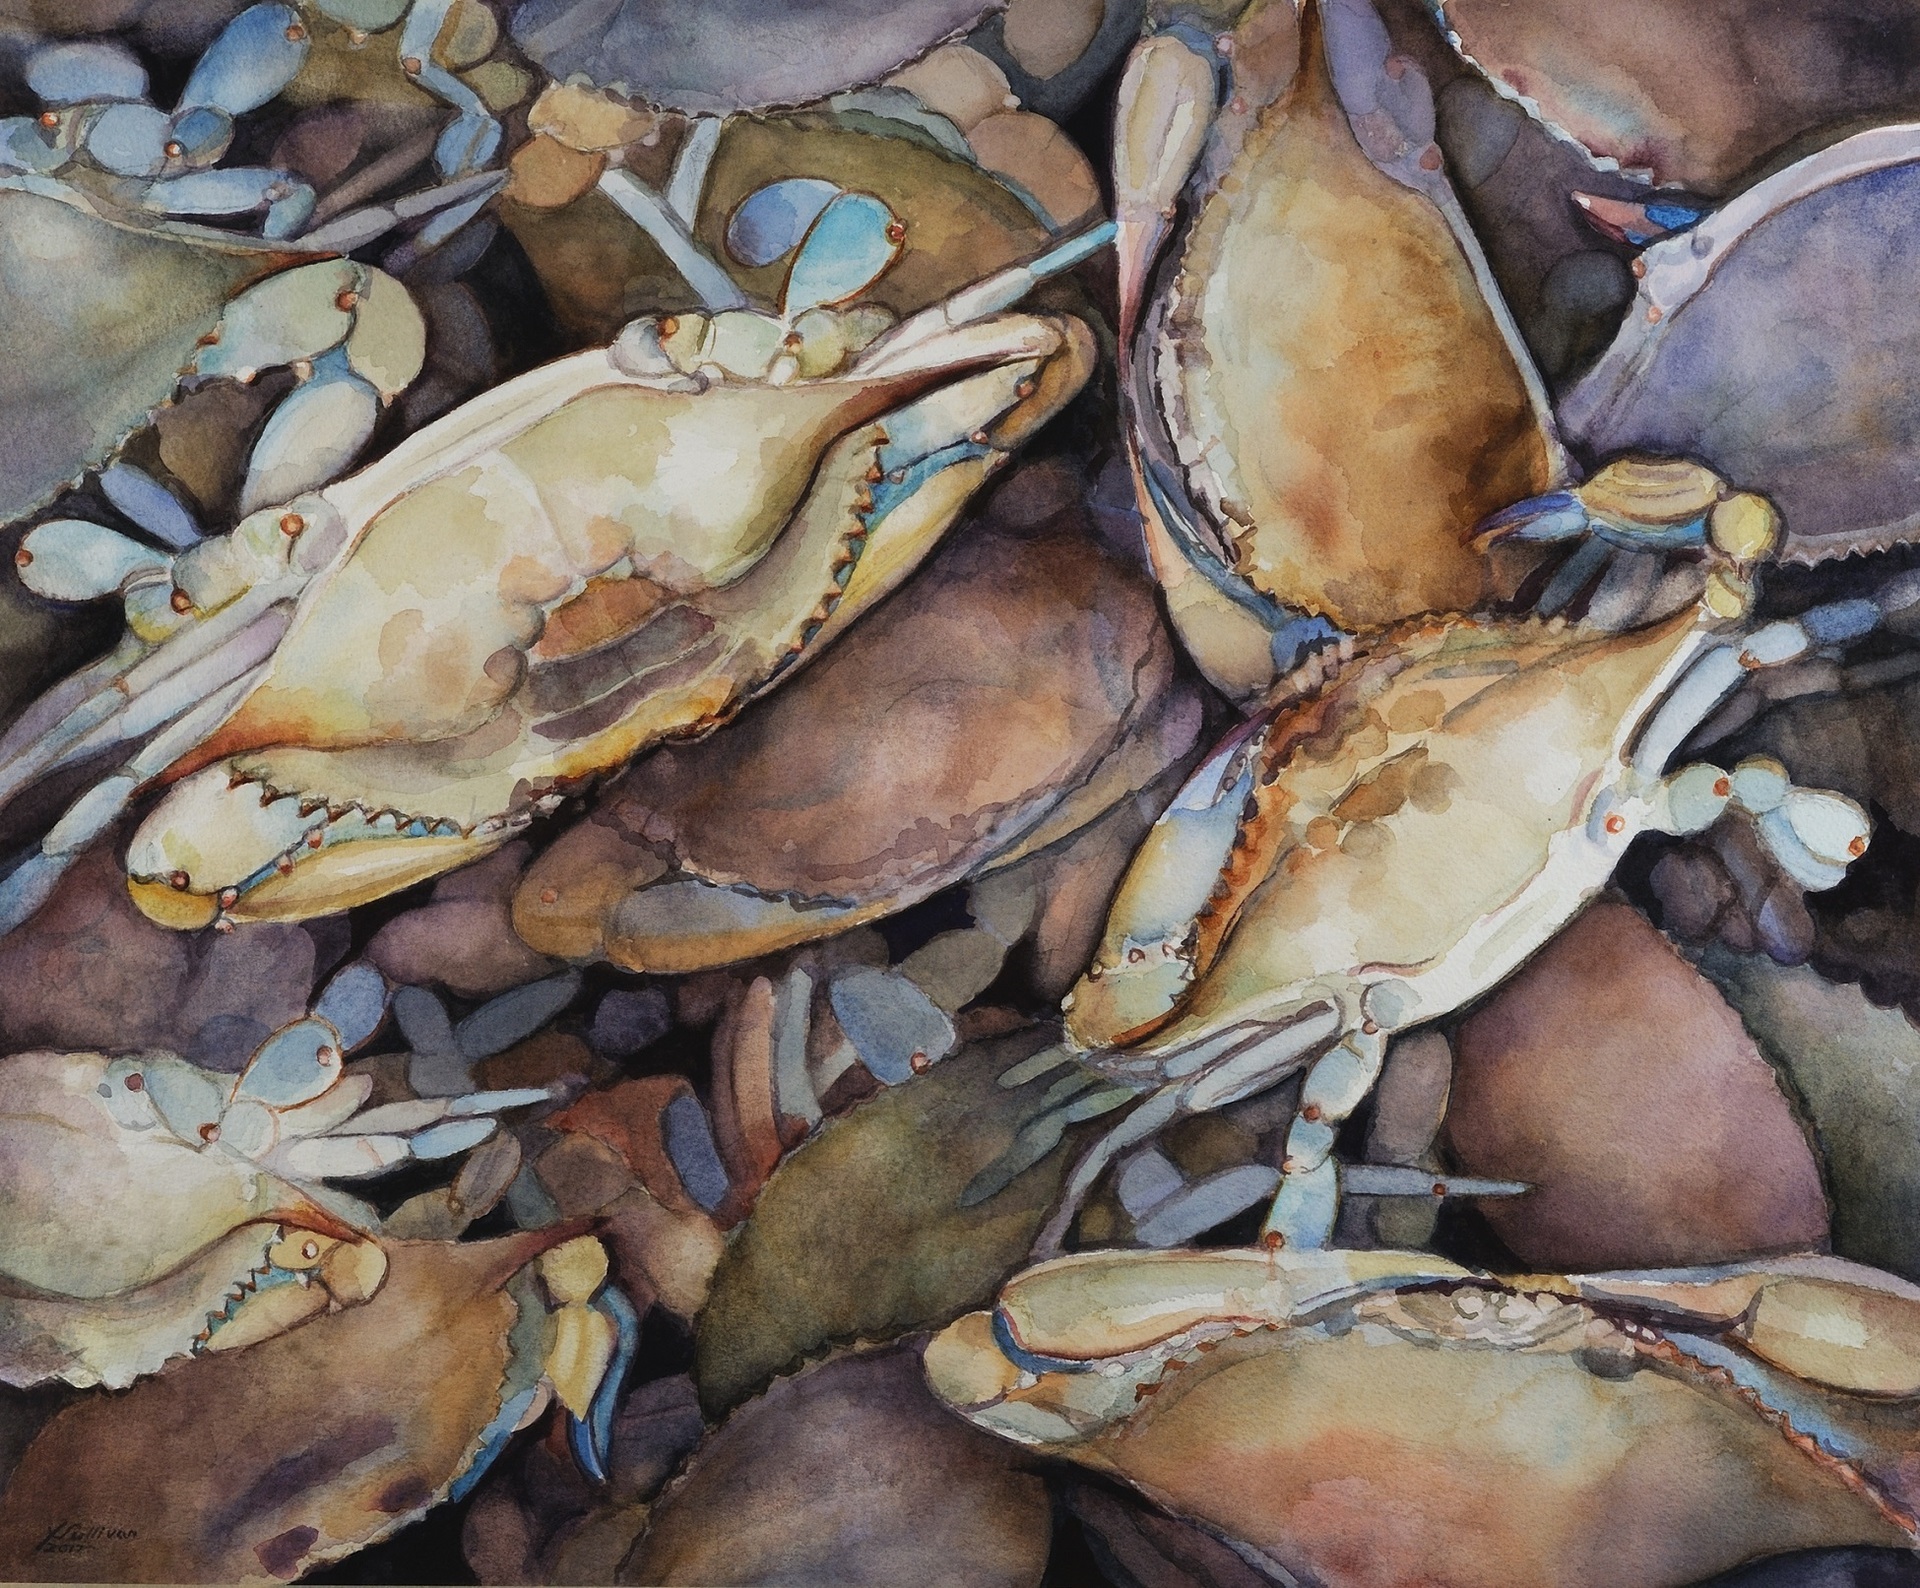 A close up of a pile of crabs